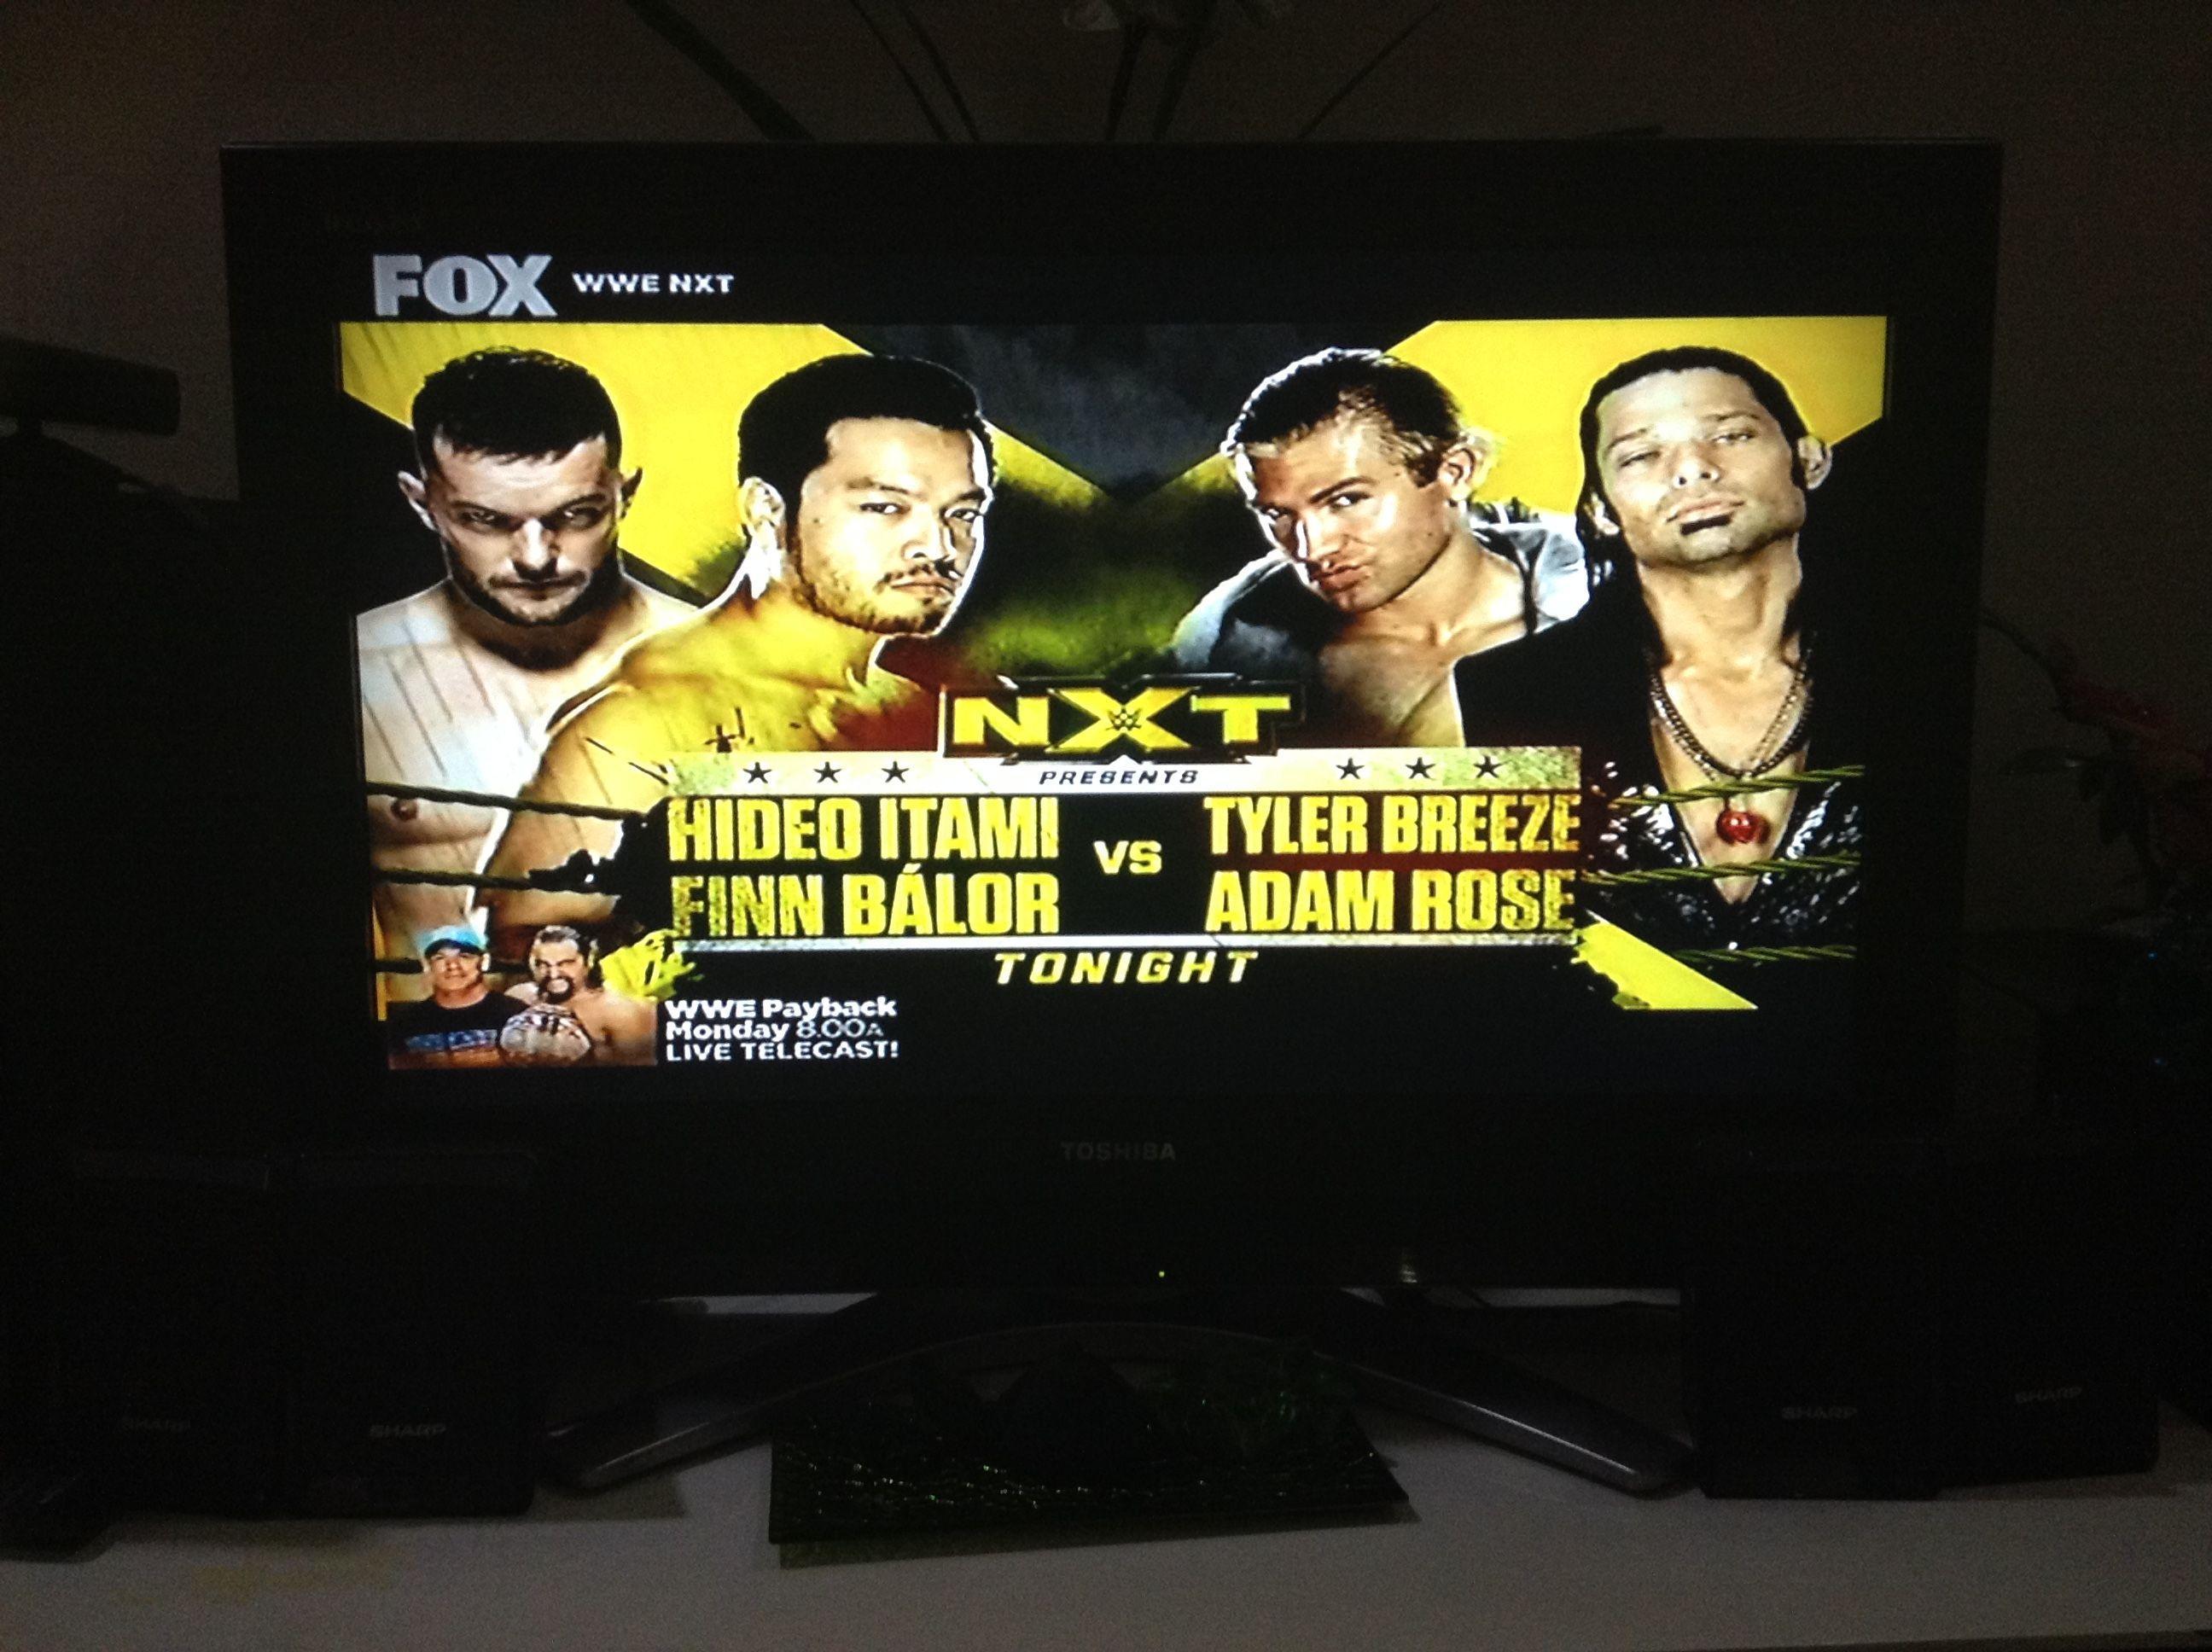 WWE NXT image Hideo Itami and Finn Bálor vs. Tyler Breeze